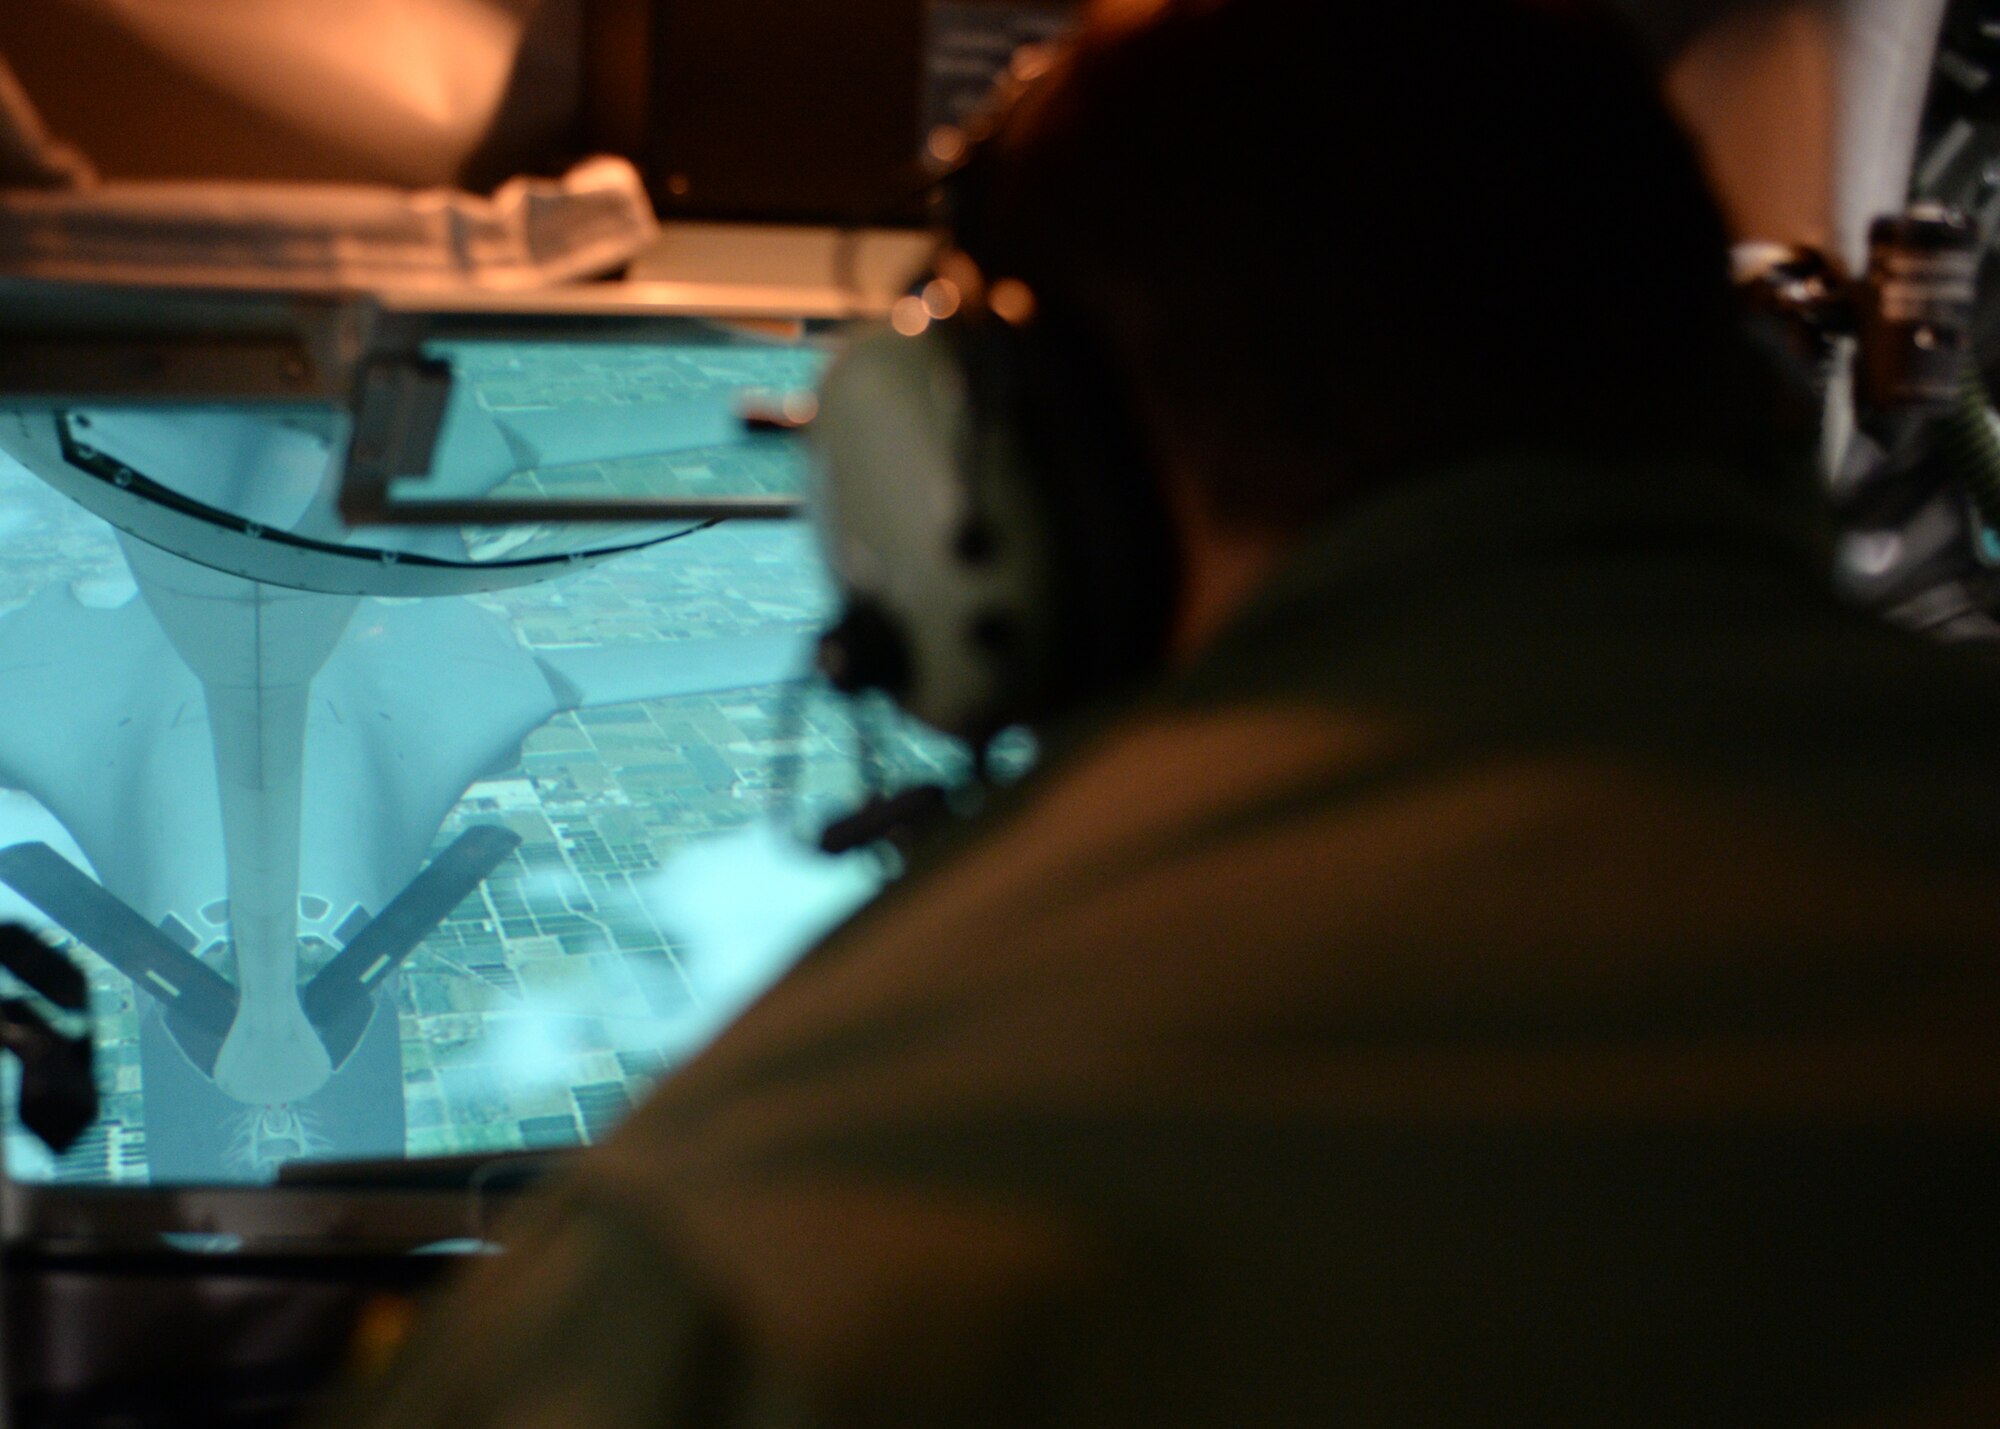 Airman 1st Class Greg Adams refuels a B-1B Lancer in the Boom Operator Weapons System Trainer Sept. 22, 2014, at the KC-135 Stratotanker Aircrew Training Center on Altus Air Force Base, Okla. Altus AFB hosts two BOWST in its training facility. The BOWST is an inflight refueling training simulator that helps students become proficient in operating in a boom pod before they step into an actual refueling aircraft. Adams is a student with the 97th Training Squadron. (U.S. Air Force photo/Senior Airman Franklin R. Ramos)